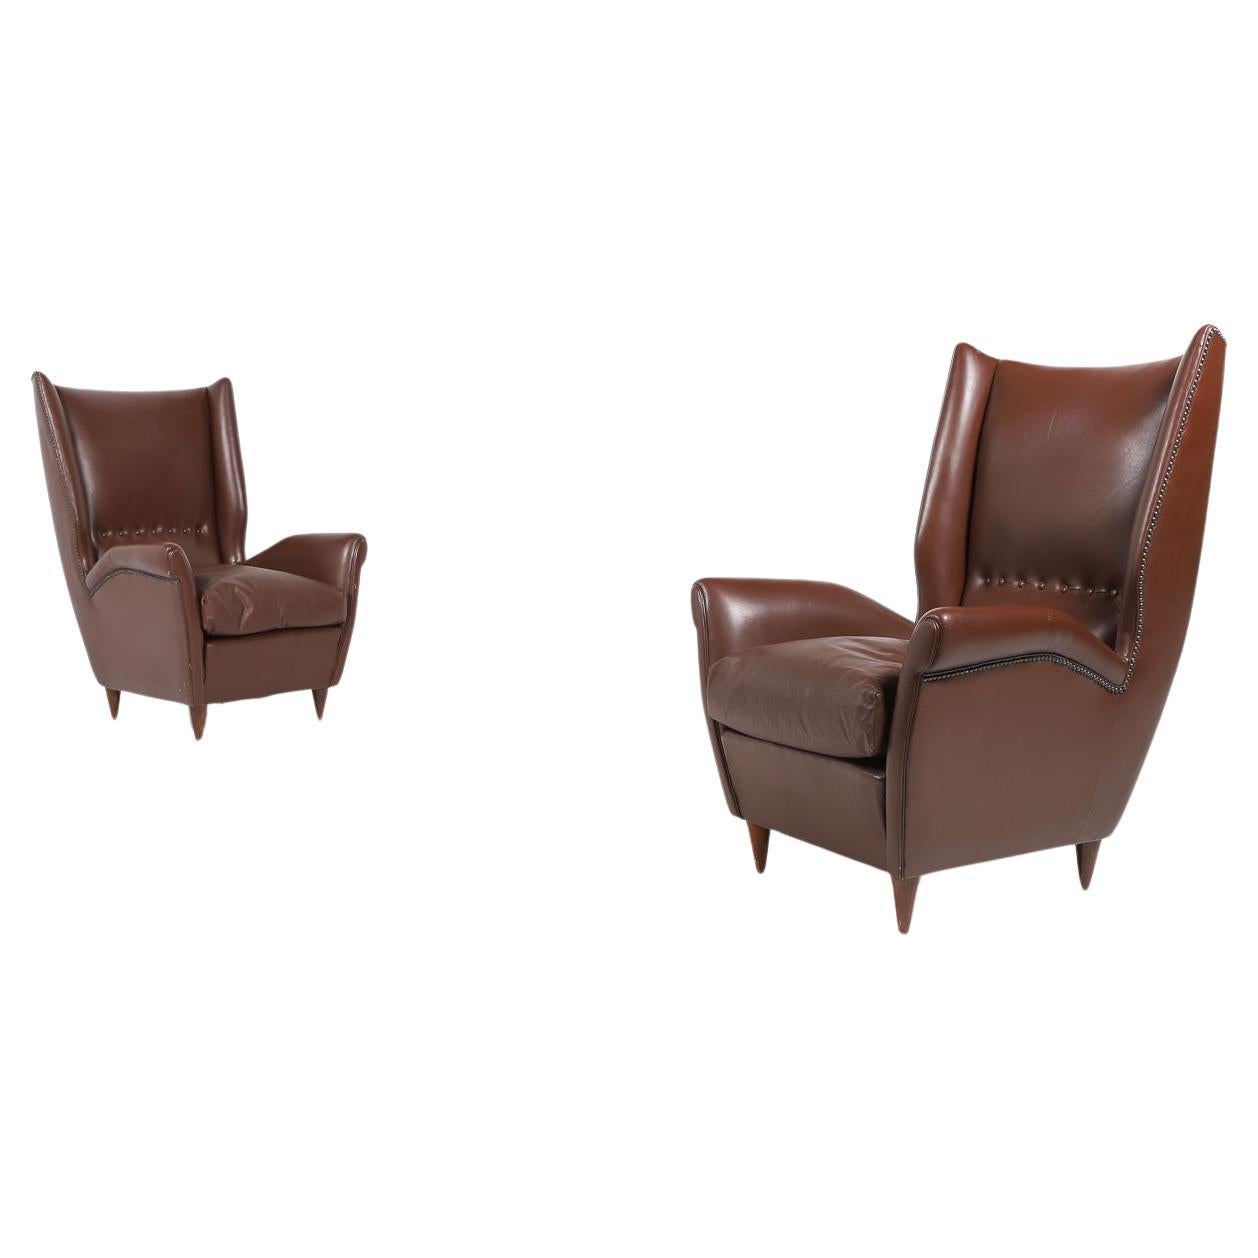 Pair of Italian Wingback Lounge armchairs by Gio Ponti, 1950’s For Sale